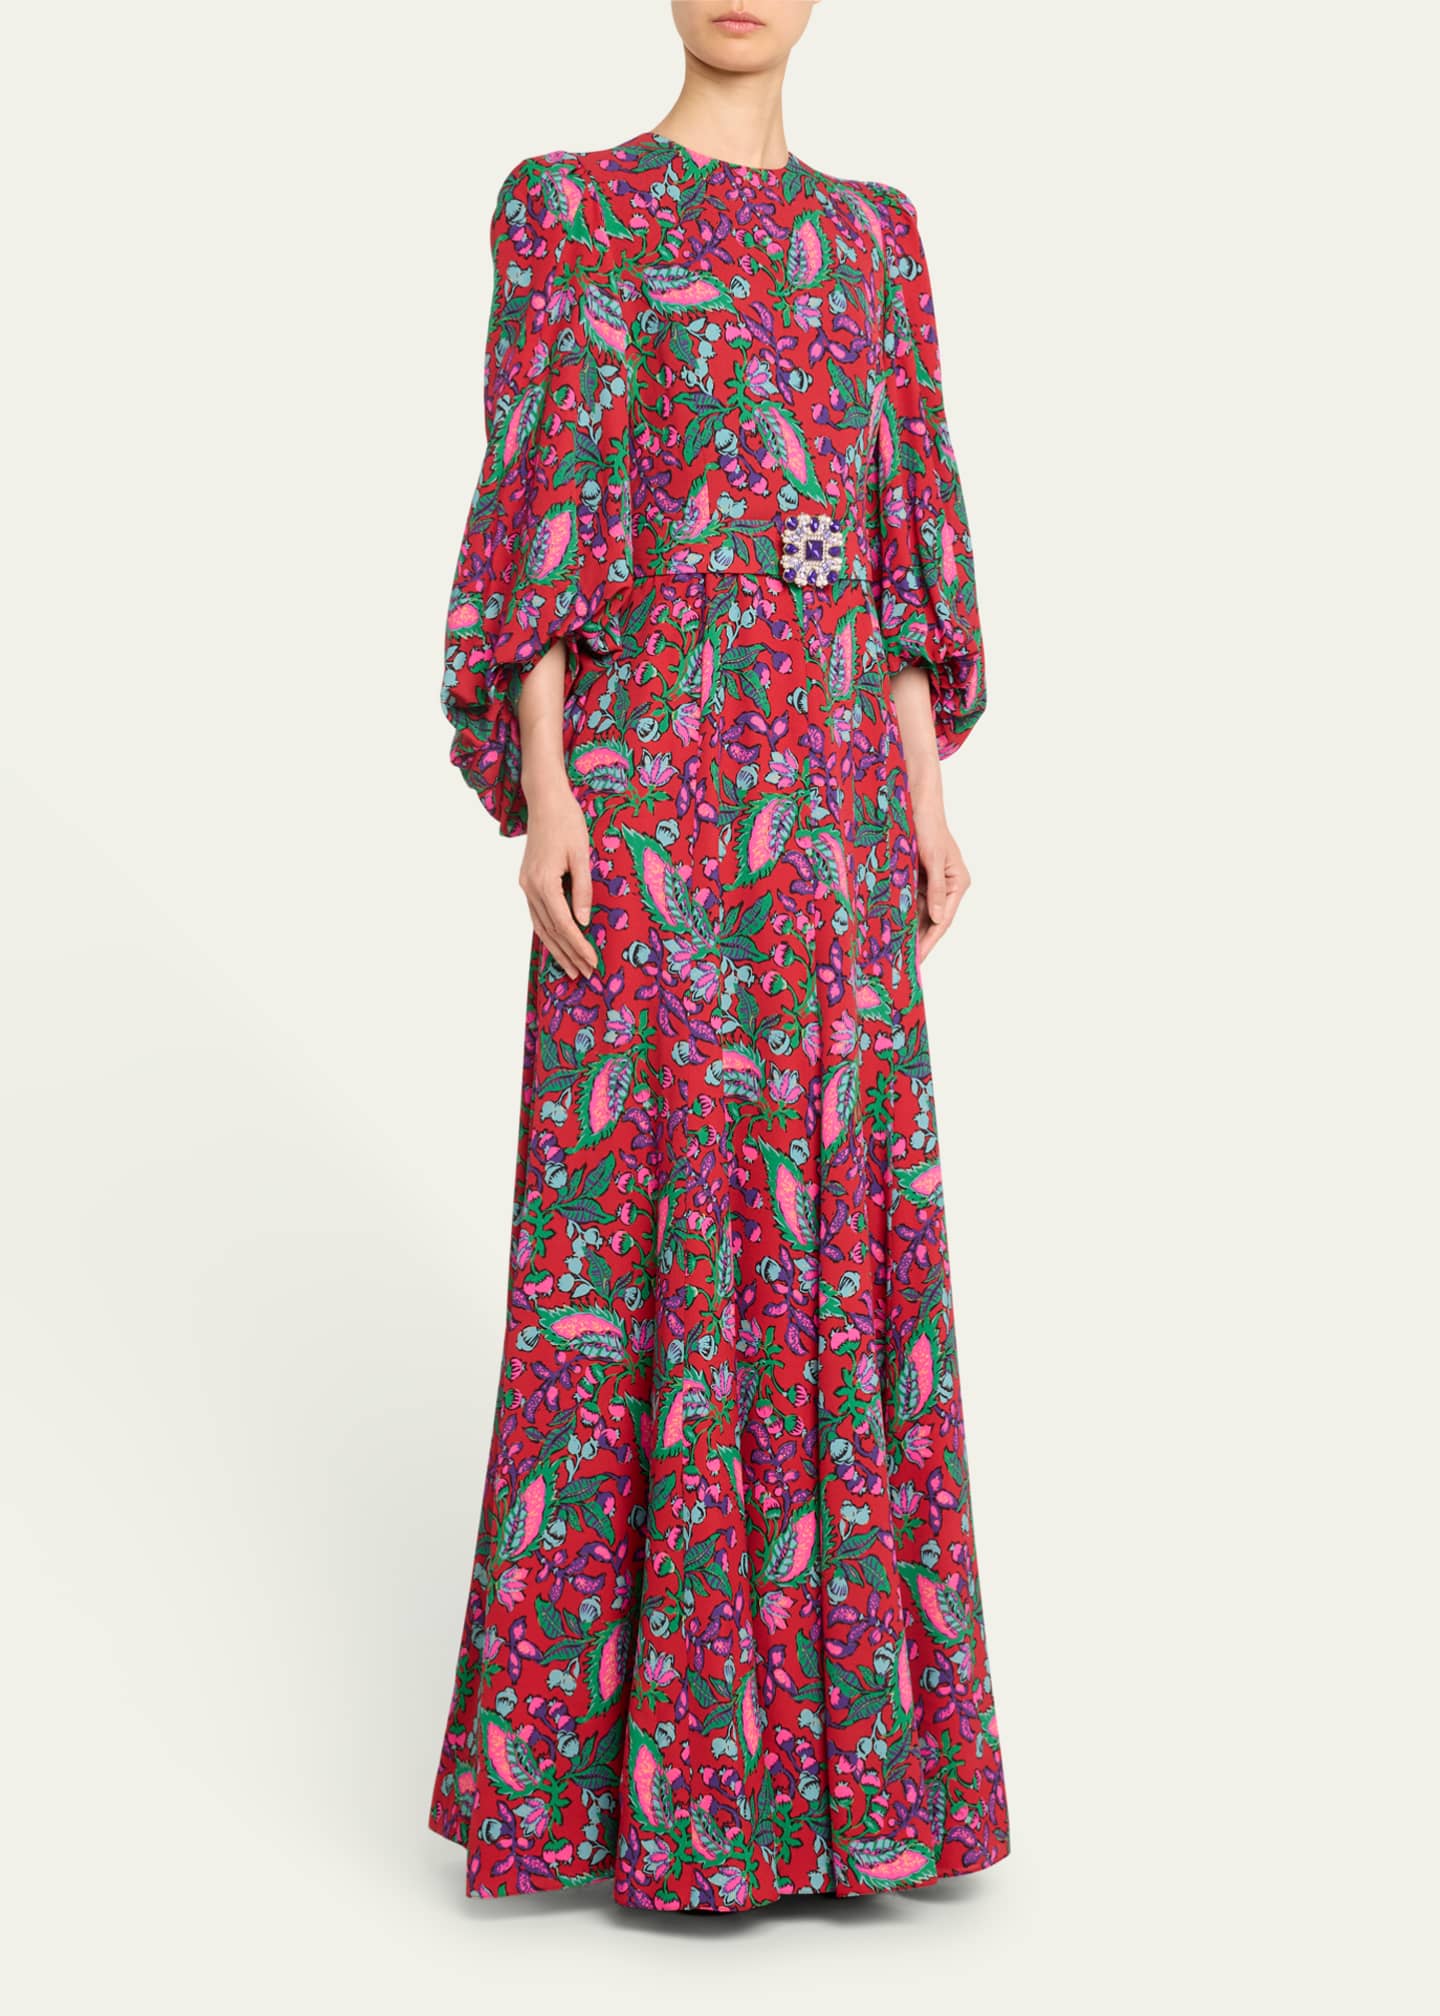 Andrew Gn Floral Print Puff-Sleeve Belted Silk Gown - Bergdorf Goodman